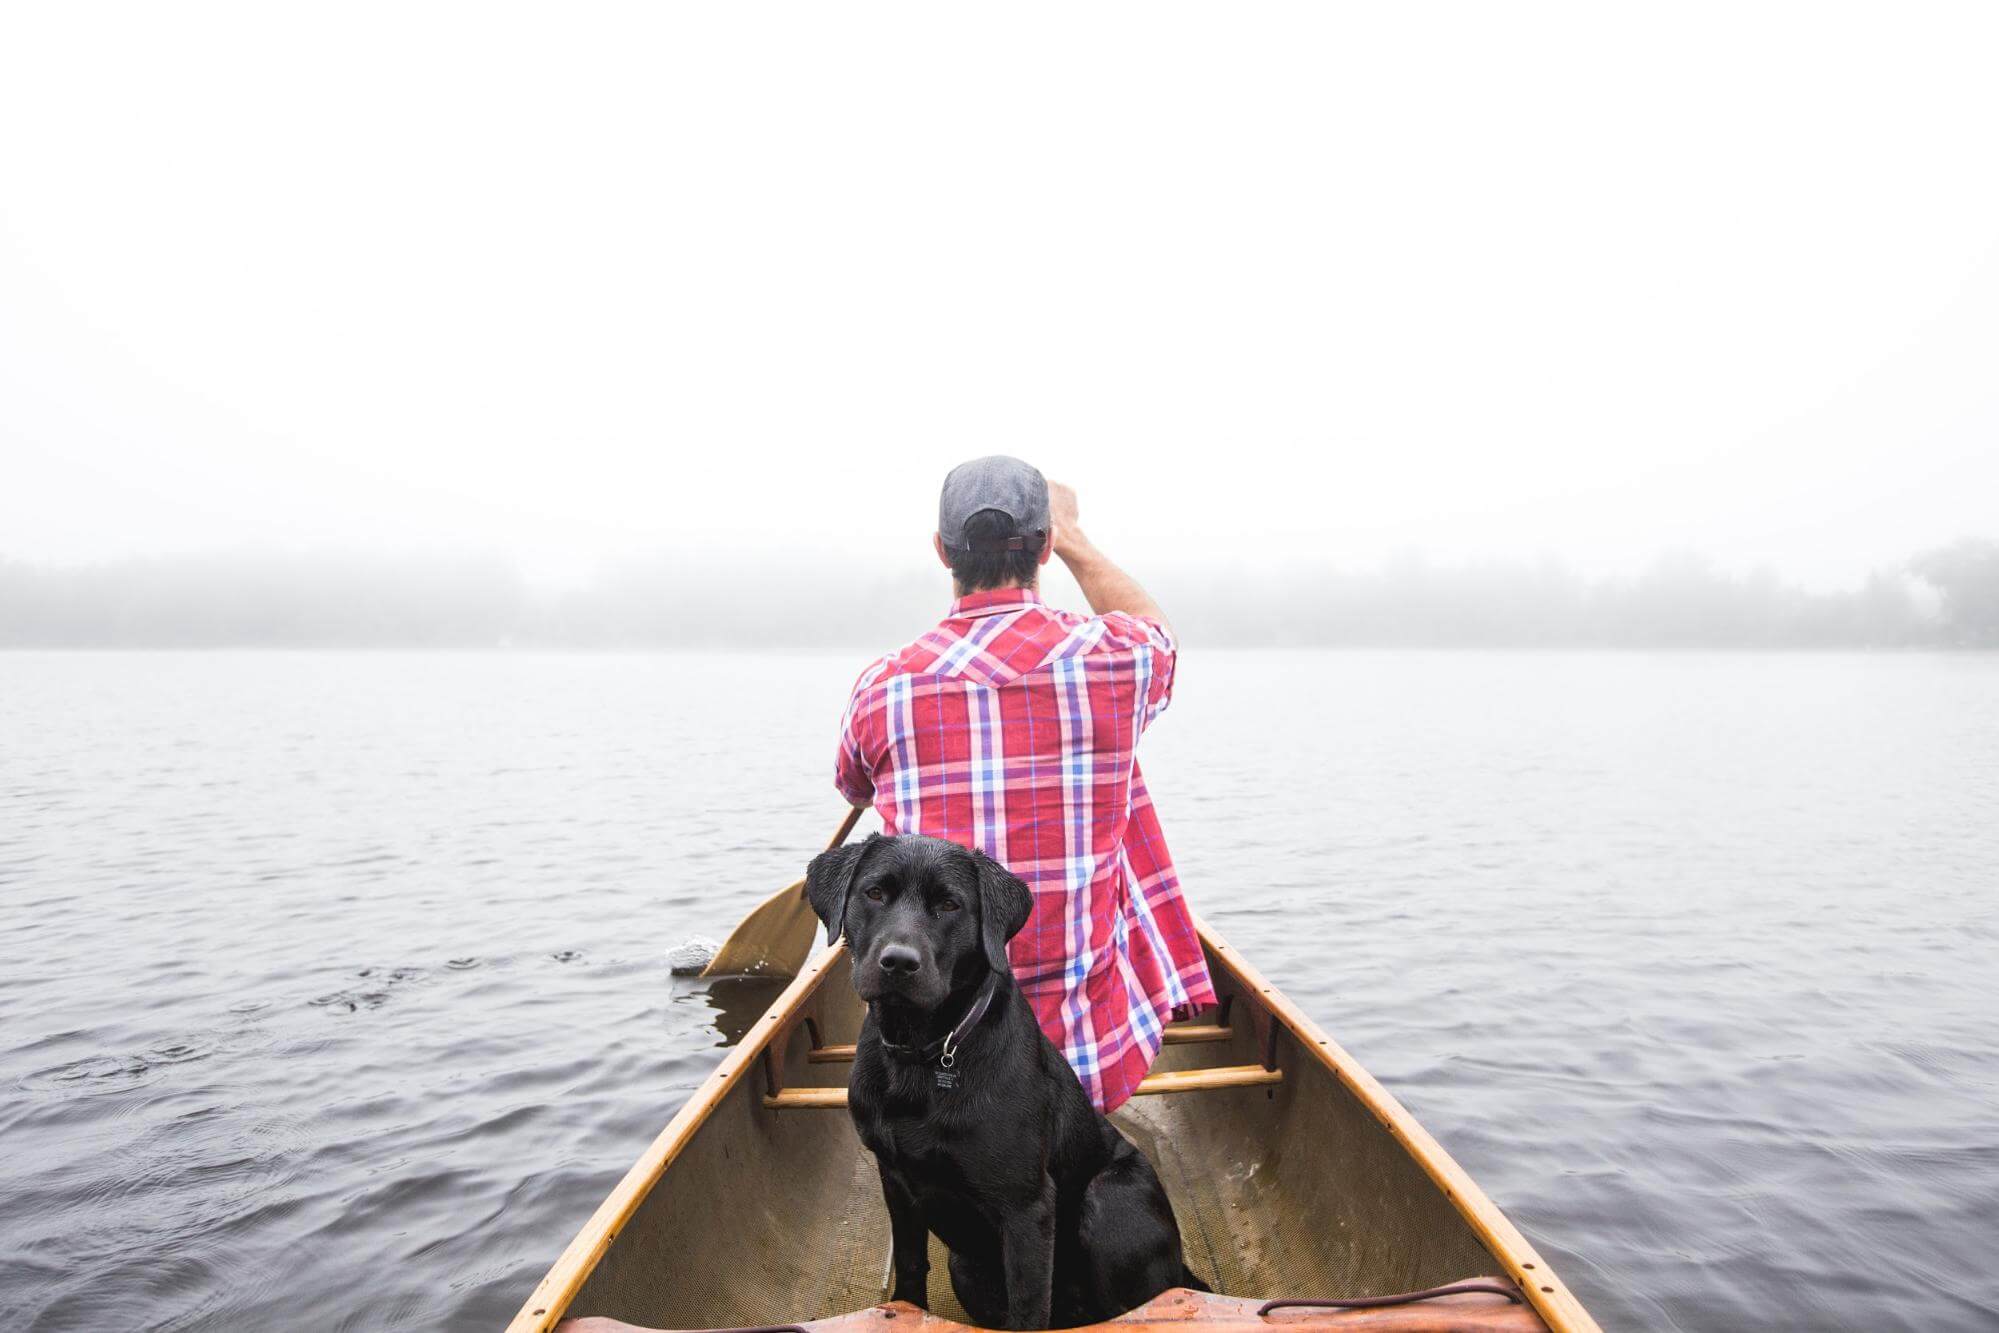 A man and a dog on a boat